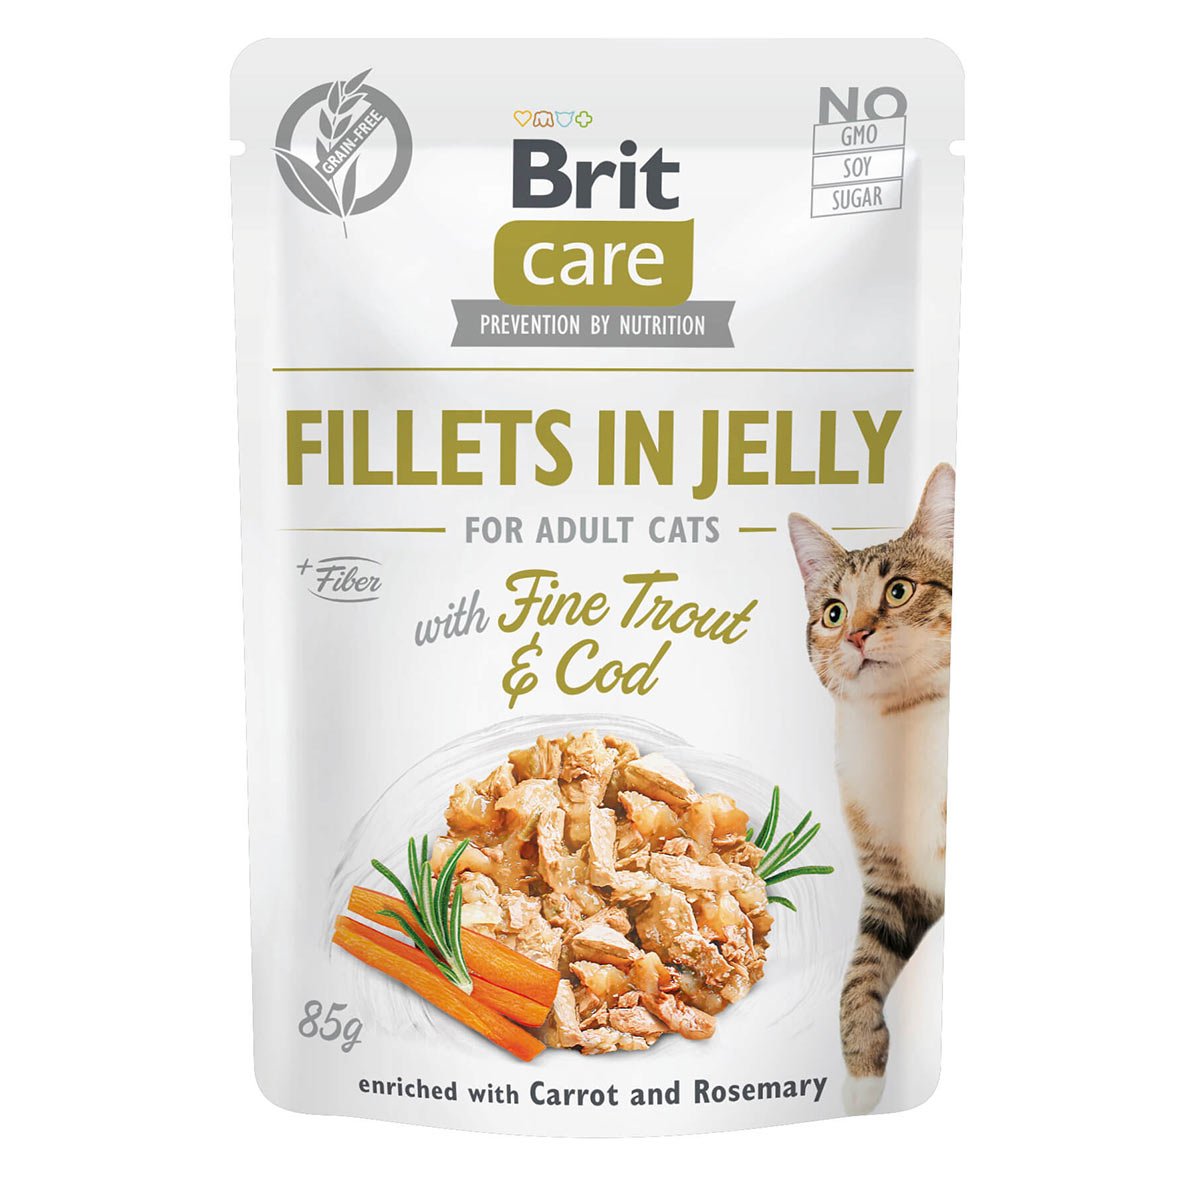 Brit Care Cat Fillets in Jelly with Fine Trout & Cod 6x85g von Brit Care